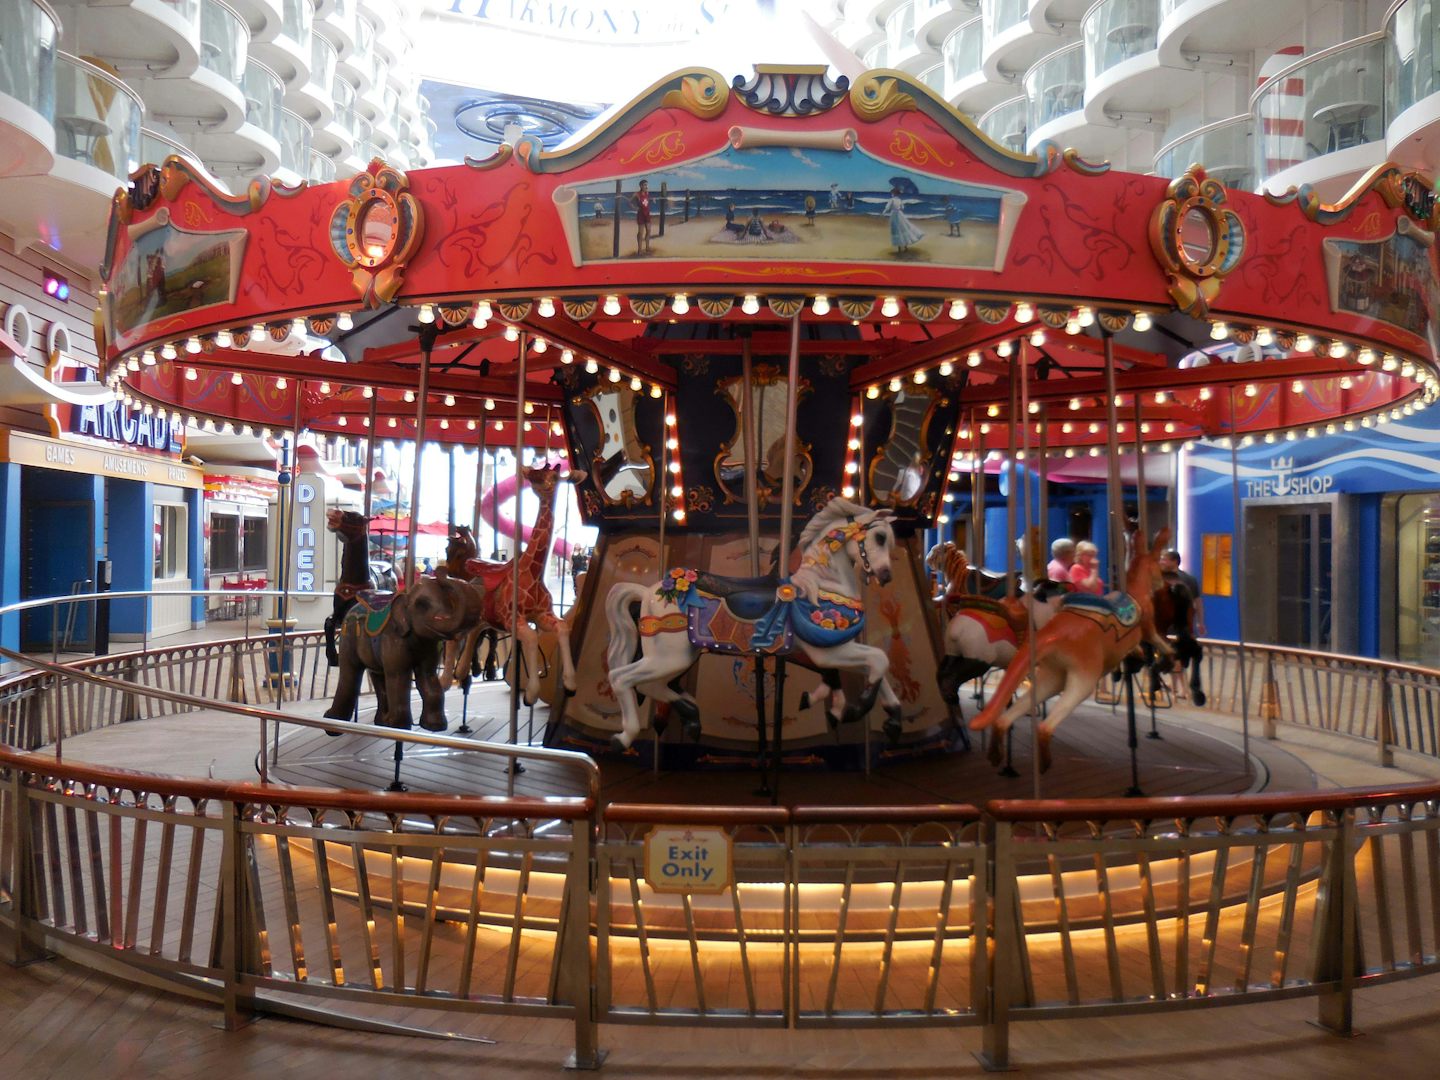 A Merry-go-round on a ship! Why not!